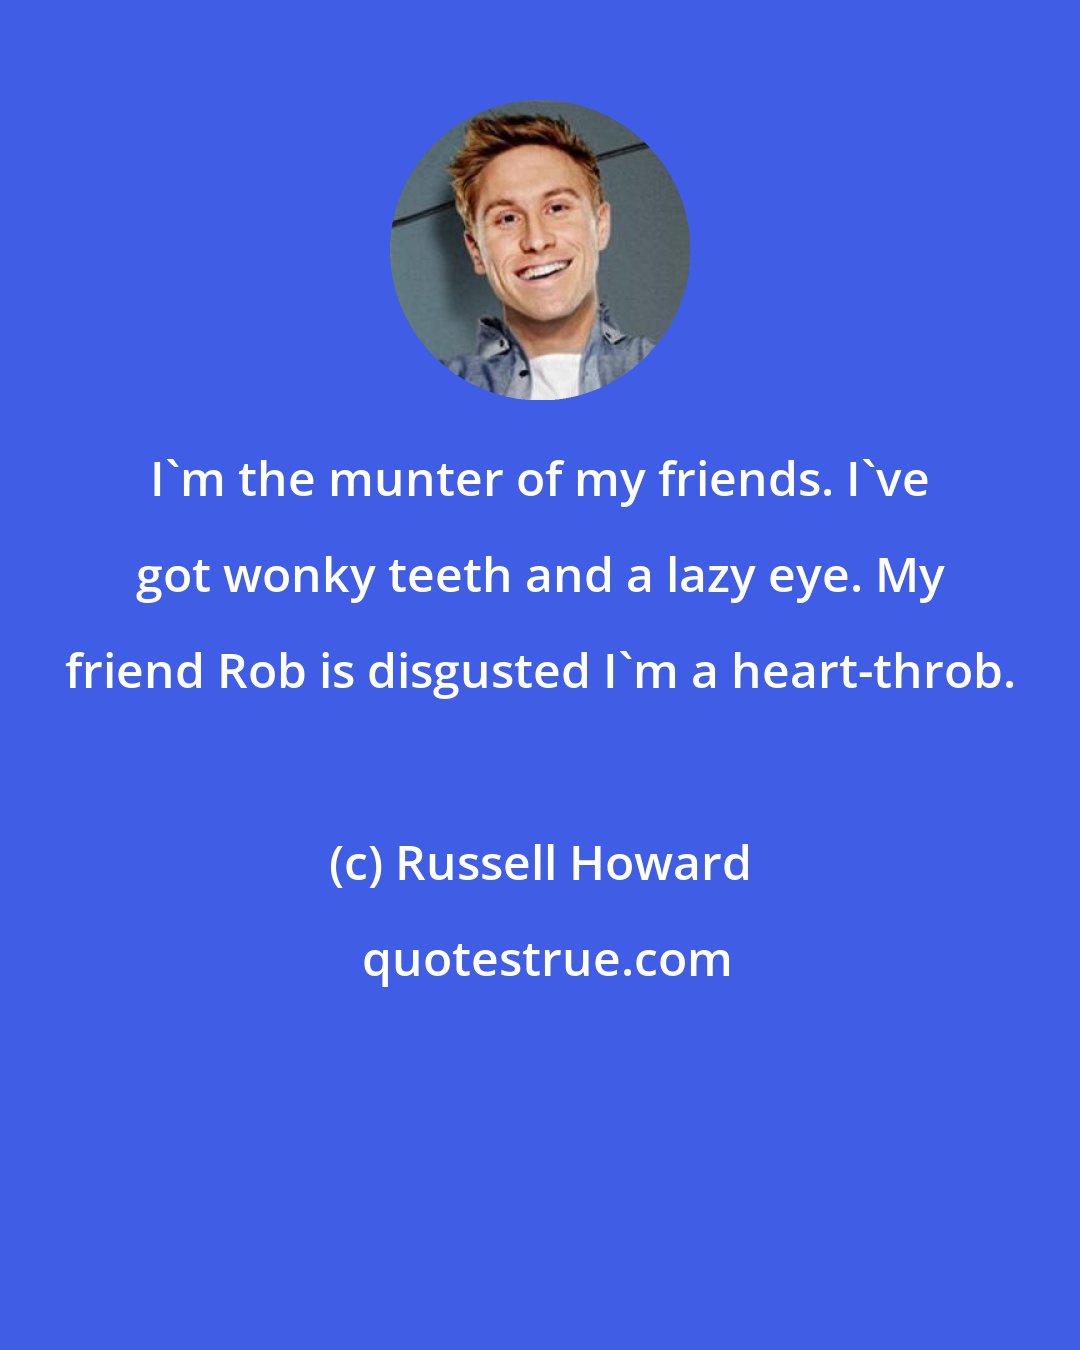 Russell Howard: I'm the munter of my friends. I've got wonky teeth and a lazy eye. My friend Rob is disgusted I'm a heart-throb.